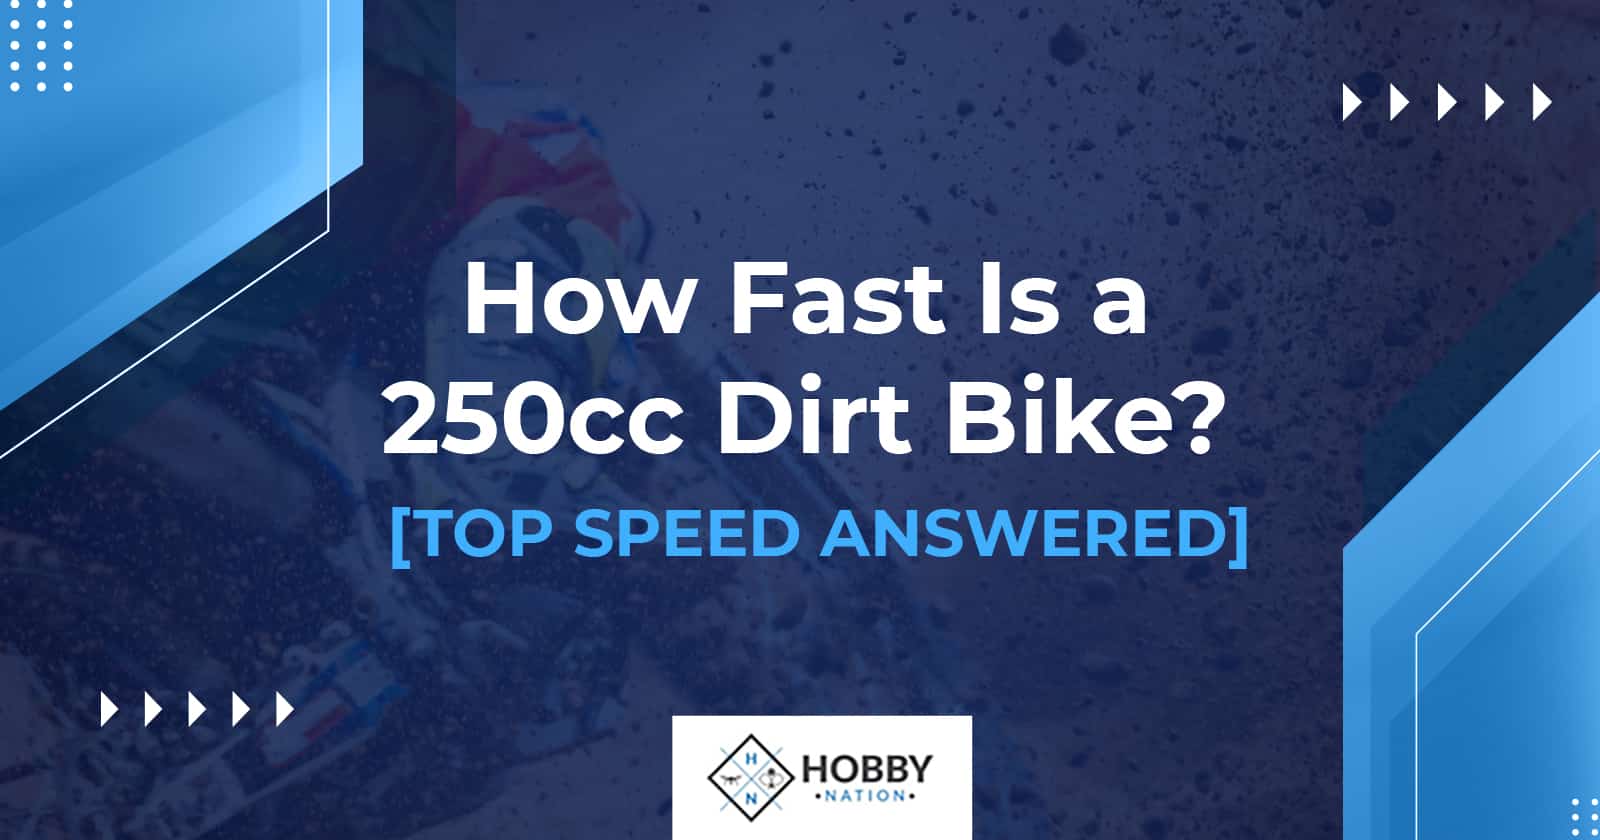 How Fast Is a 250cc Dirt Bike [TOP SPEED ANSWERED]